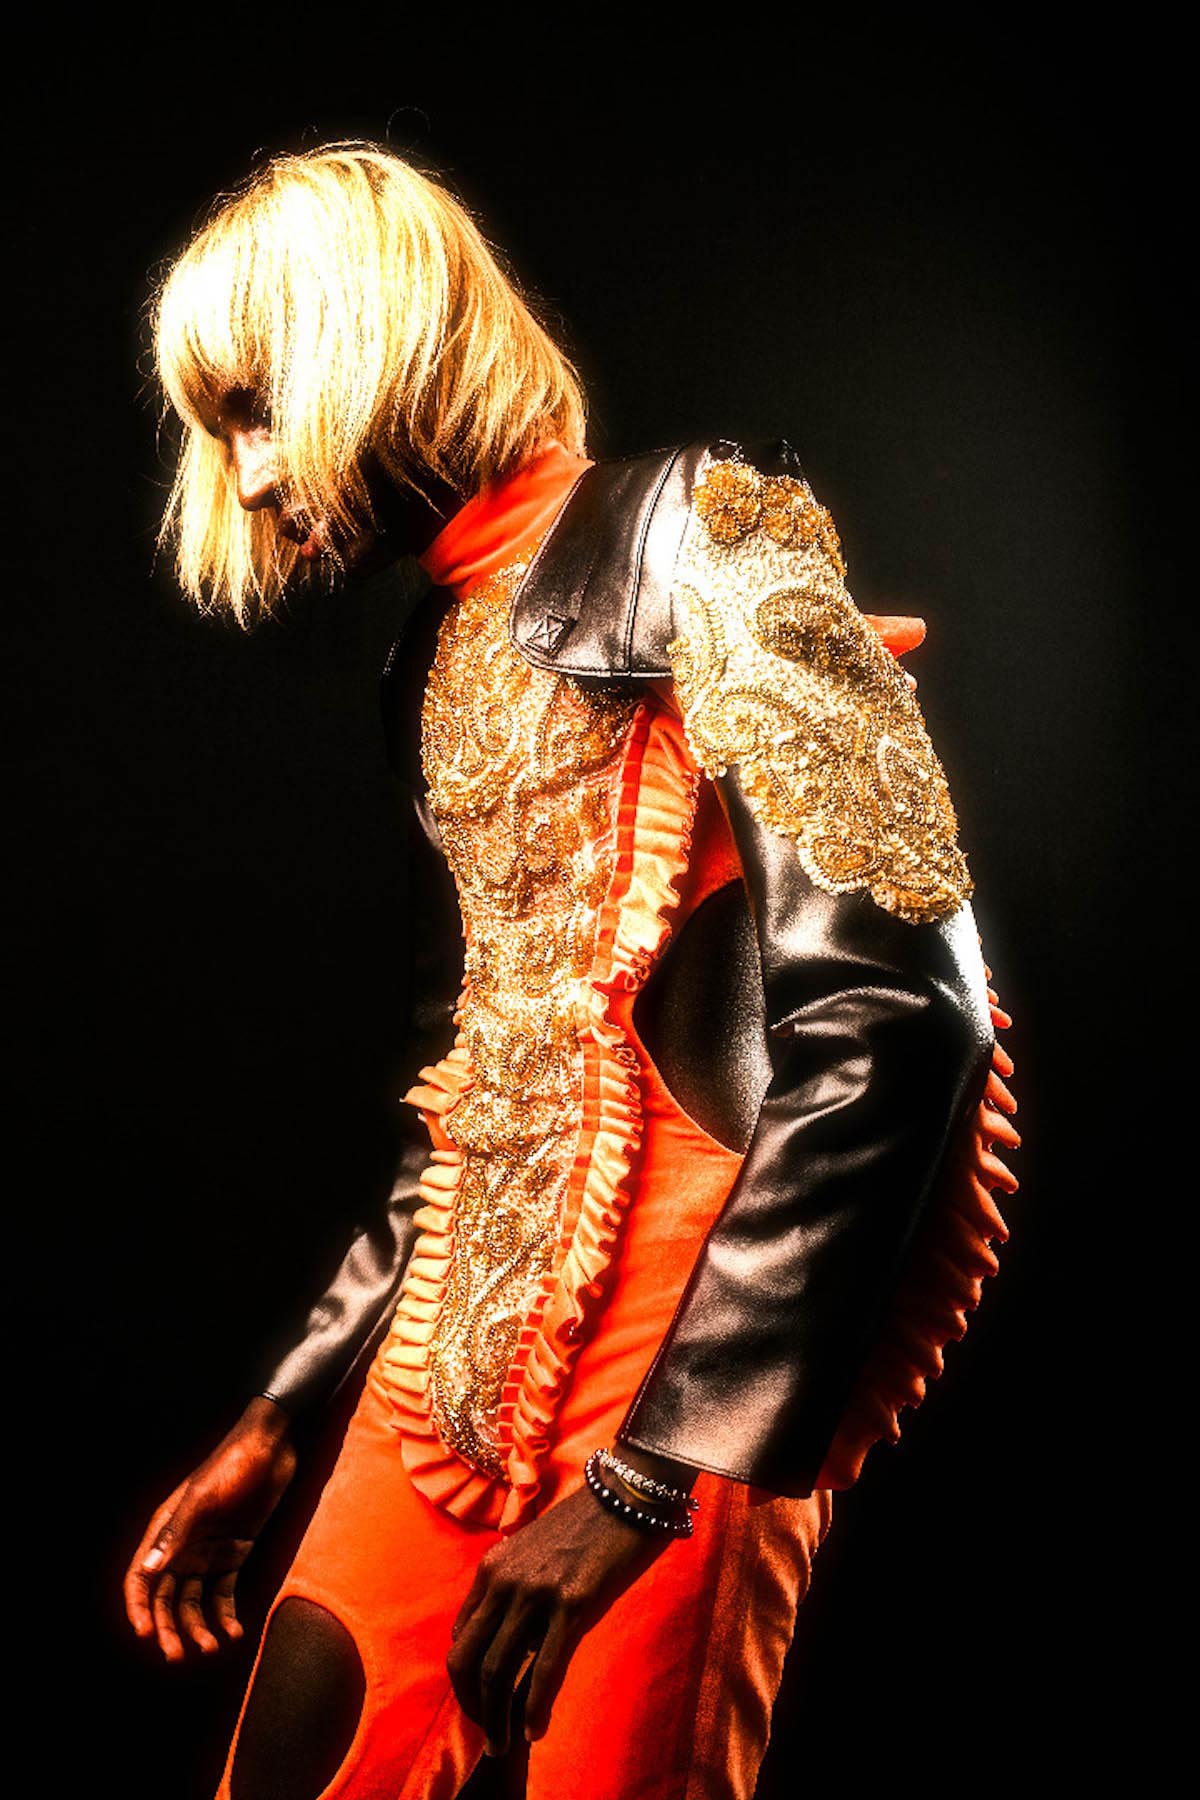 Person with blond hair that reaches just below the ear and fringes. Person is visible from the side and down to the knees, the face is mostly covered by hair, wears an orange full-body suit with black sleeves and black big dots at the waist and thighs. On the front of the suit, from the collar to the legs, there is a gold large-scale appliqué with ruffles. The gold is repeated at the shoulder. There is a white and a black pearl bracelet on the left wrist.